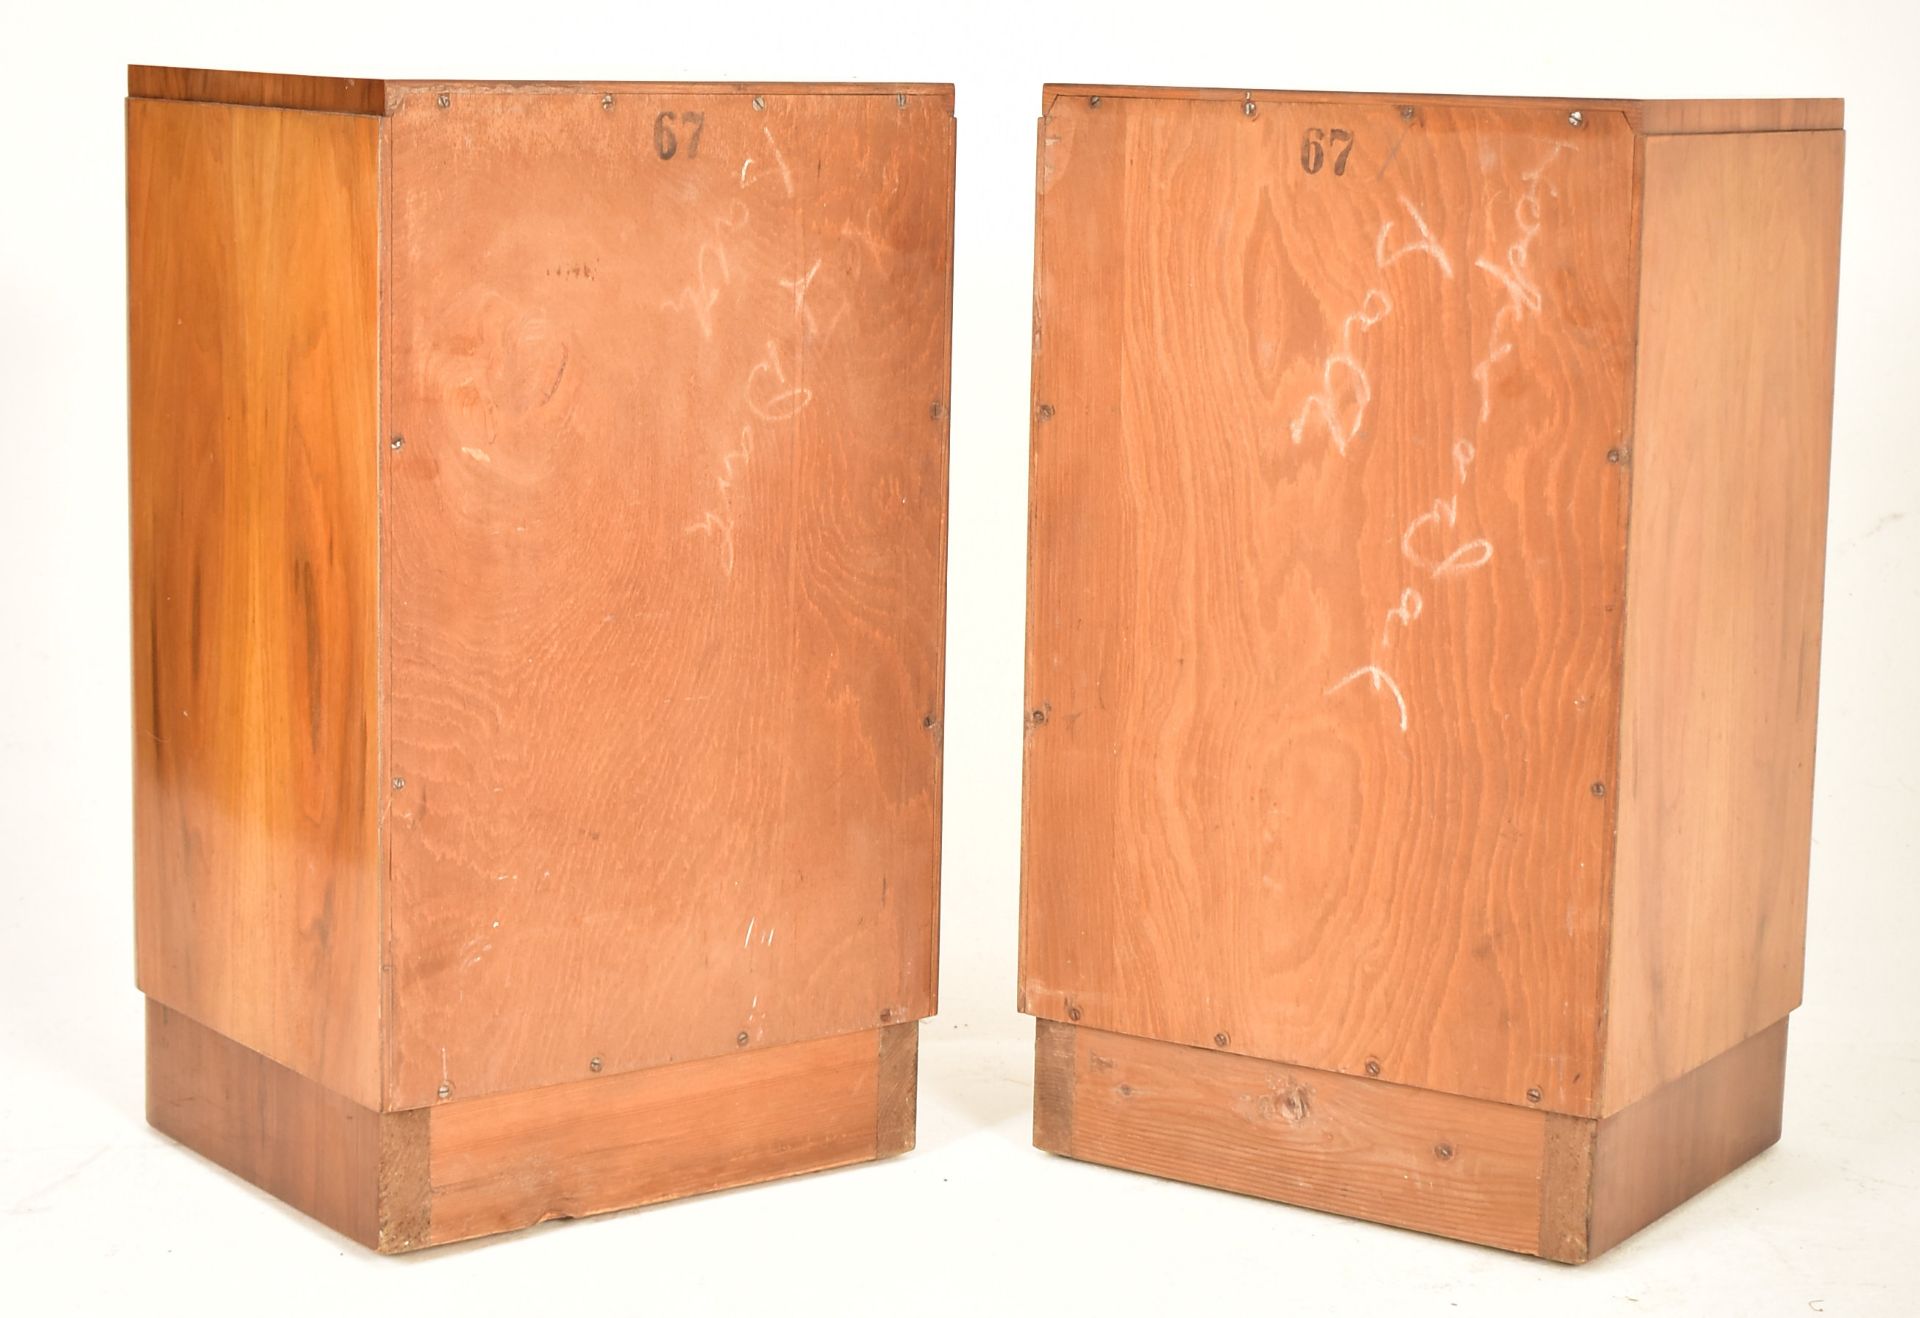 PAIR OF 20TH CENTURY ART DECO WALNUT BEDSIDE CUPBOARDS - Image 5 of 5